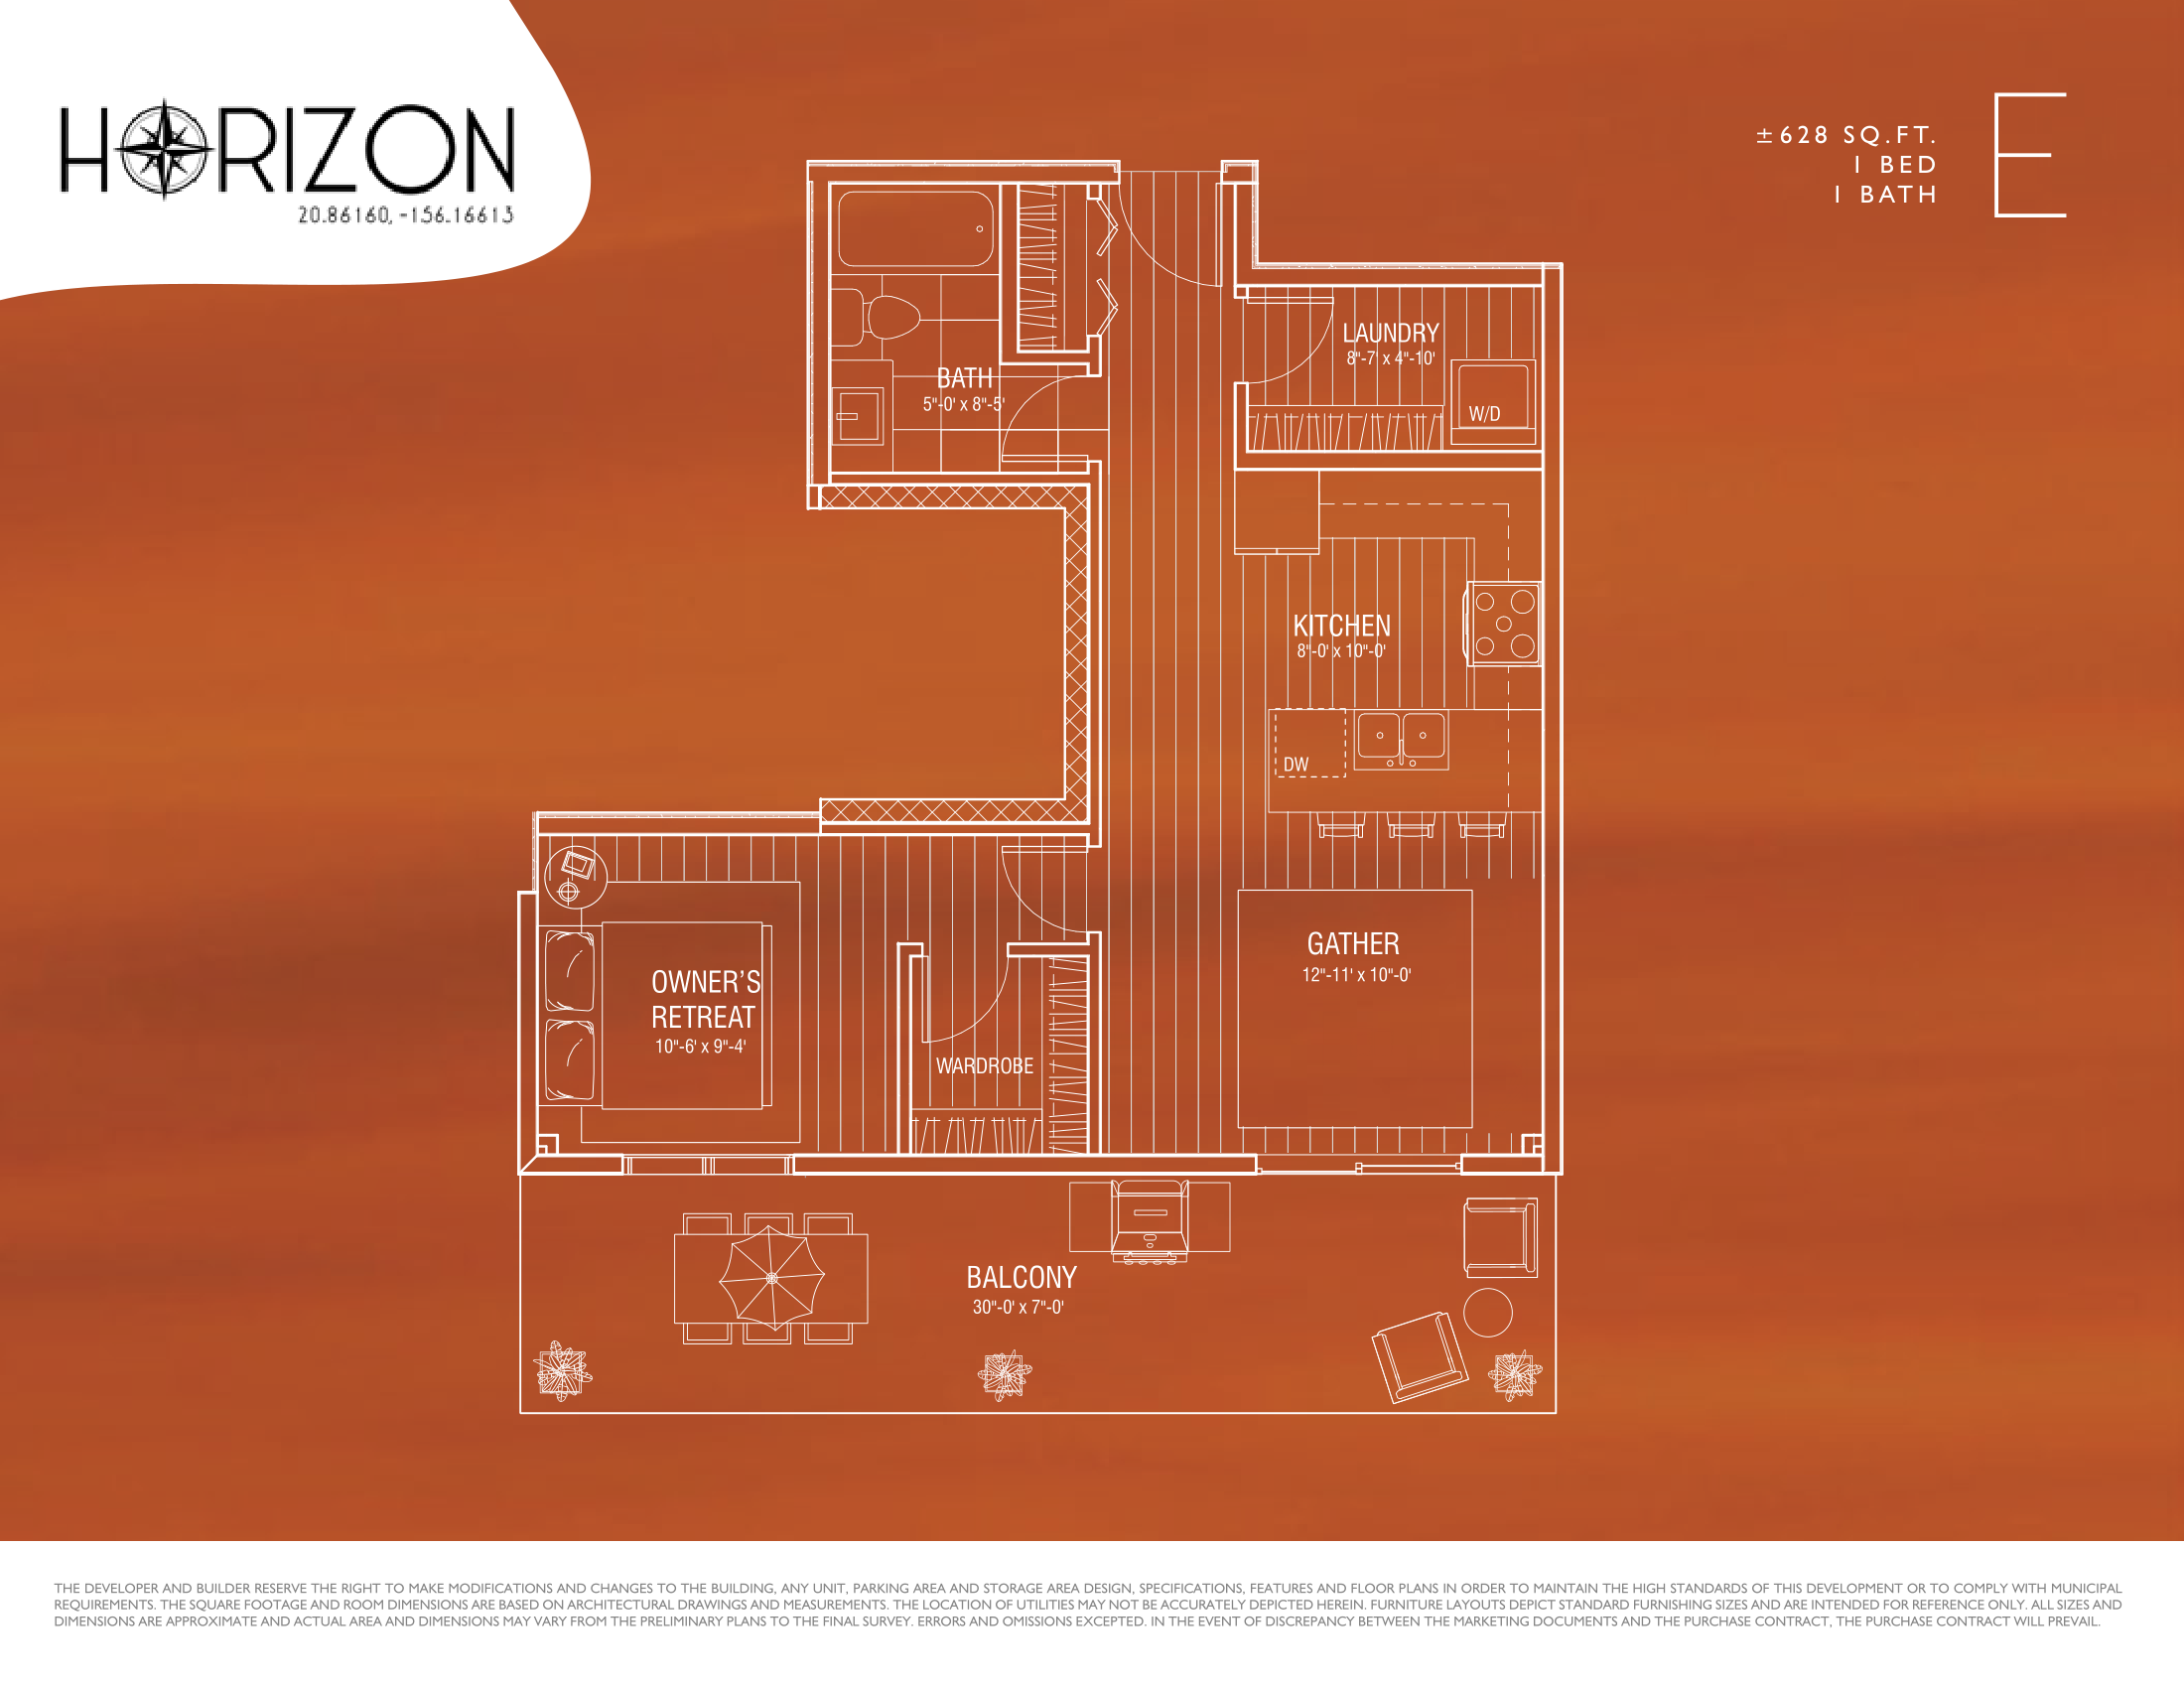  Floor Plan of Horizon Condos with undefined beds